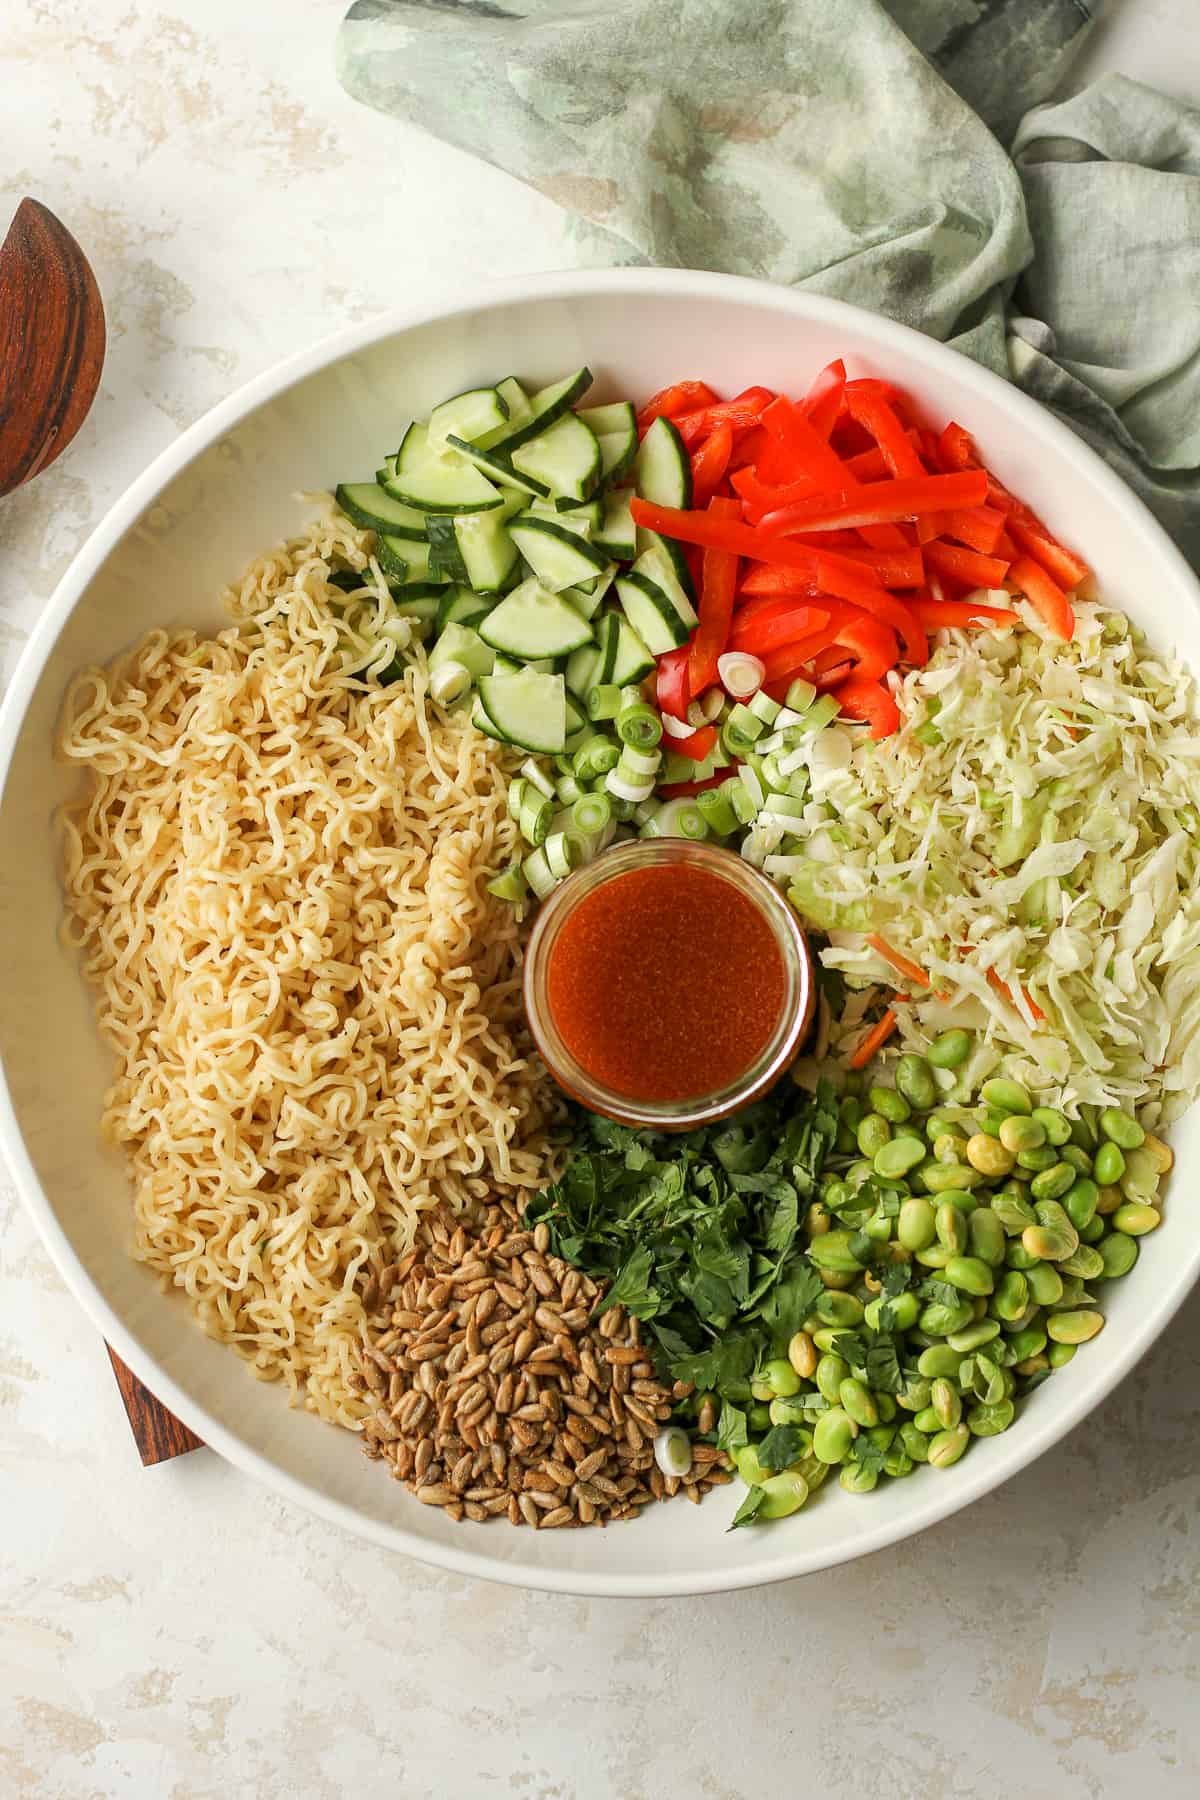 A bowl of the ramen salad with ingredients separated and a jar of dressing in the middle.